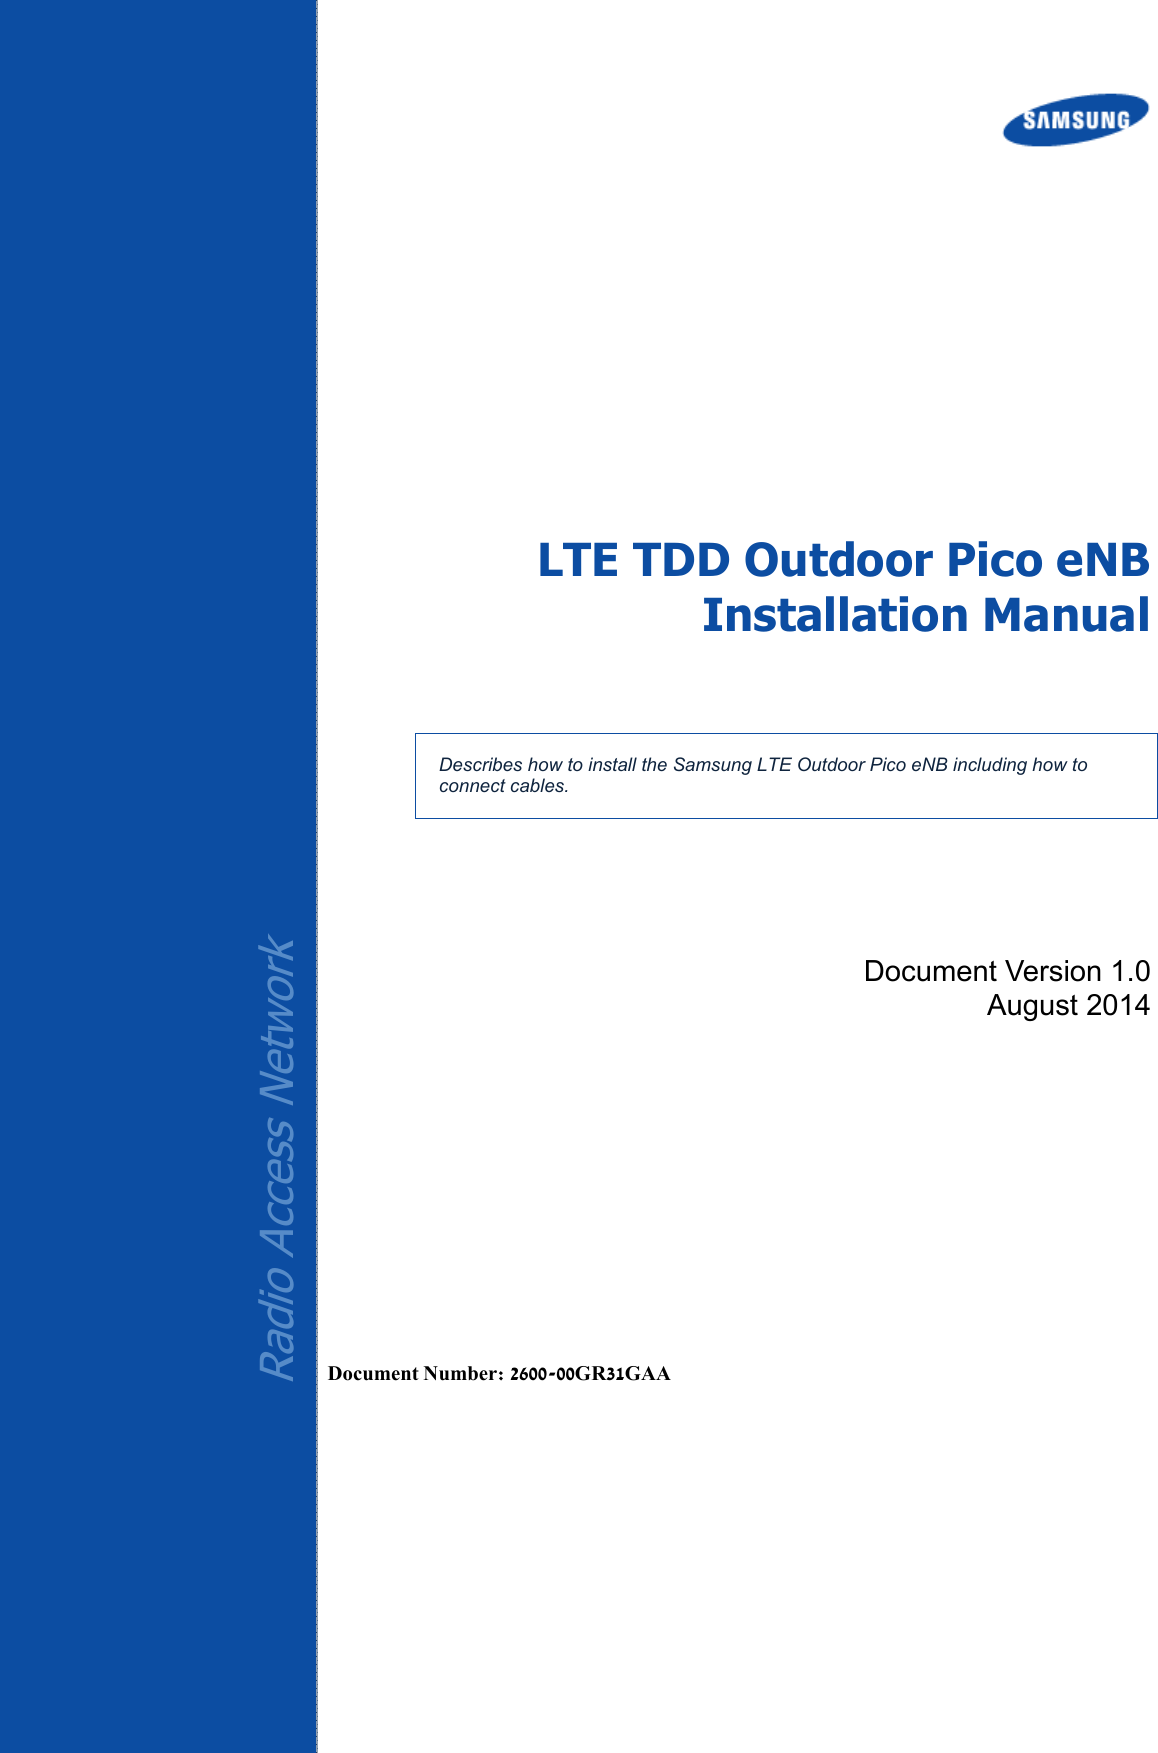    Radio Access Network  LTE TDD Outdoor Pico eNB Installation Manual   Describes how to install the Samsung LTE Outdoor Pico eNB including how to connect cables. Document Version 1.0 August 2014       Document Number: 2600-00GR31GAA 